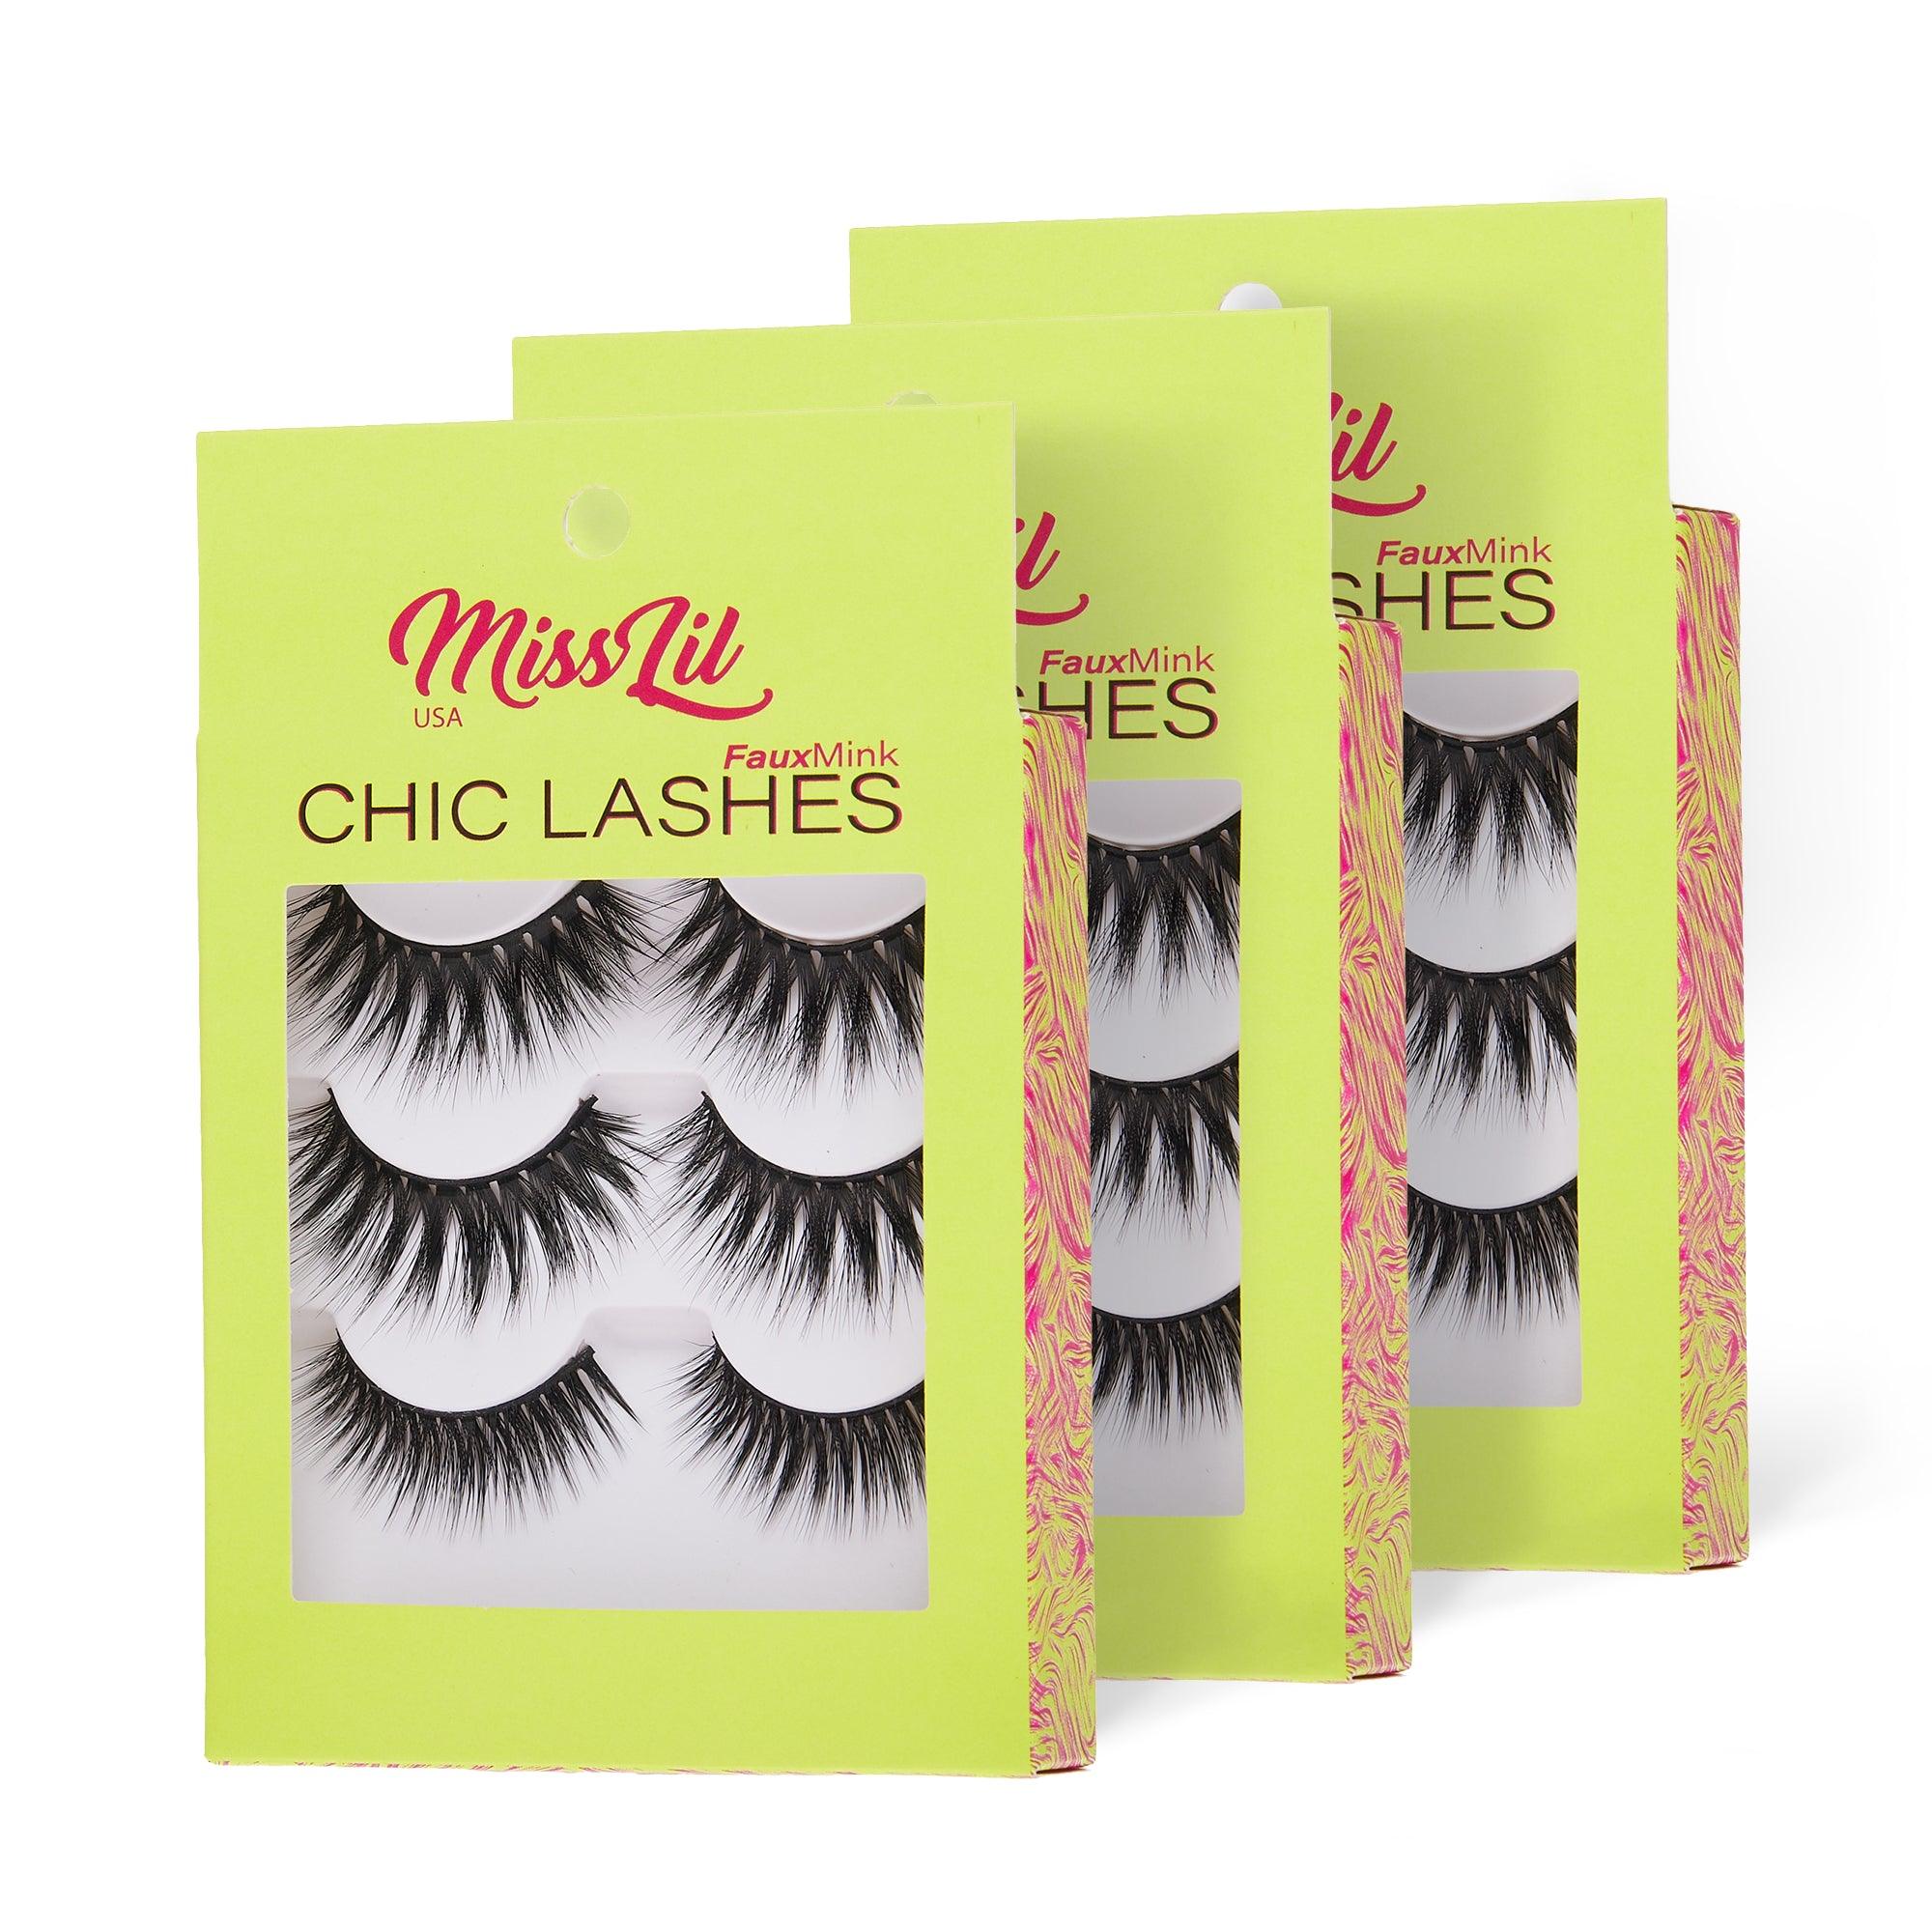 3-Pairs Lashes-Chic Lashes Collection #34 (Pack of 12) - Miss Lil USA Wholesale